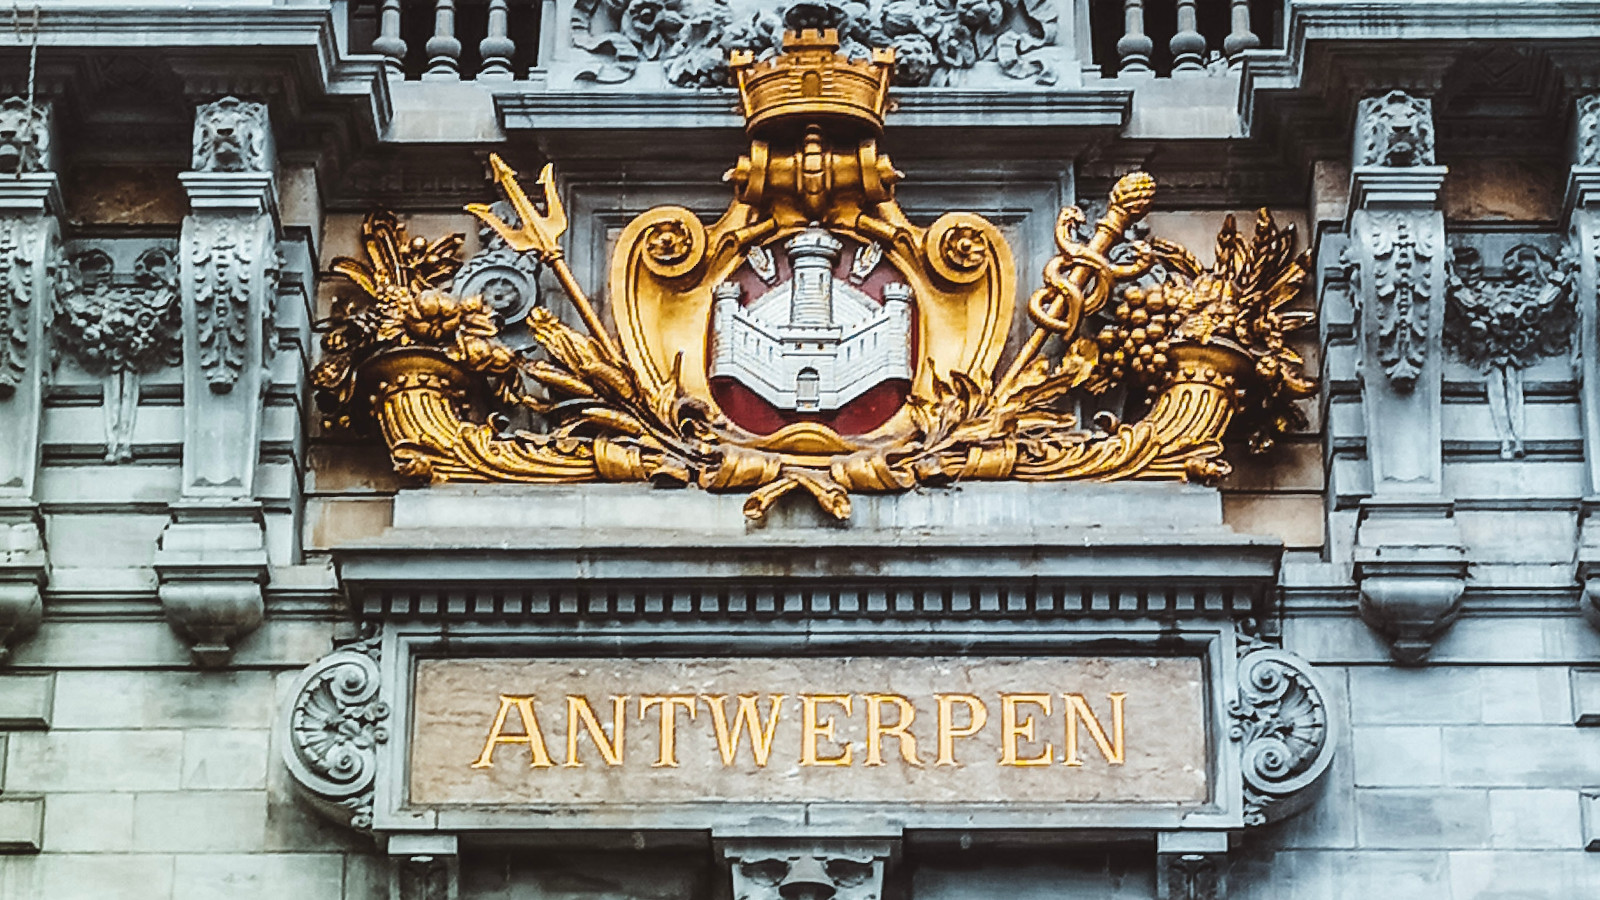 Play ransomware claims attack on Belgium city of Antwerp